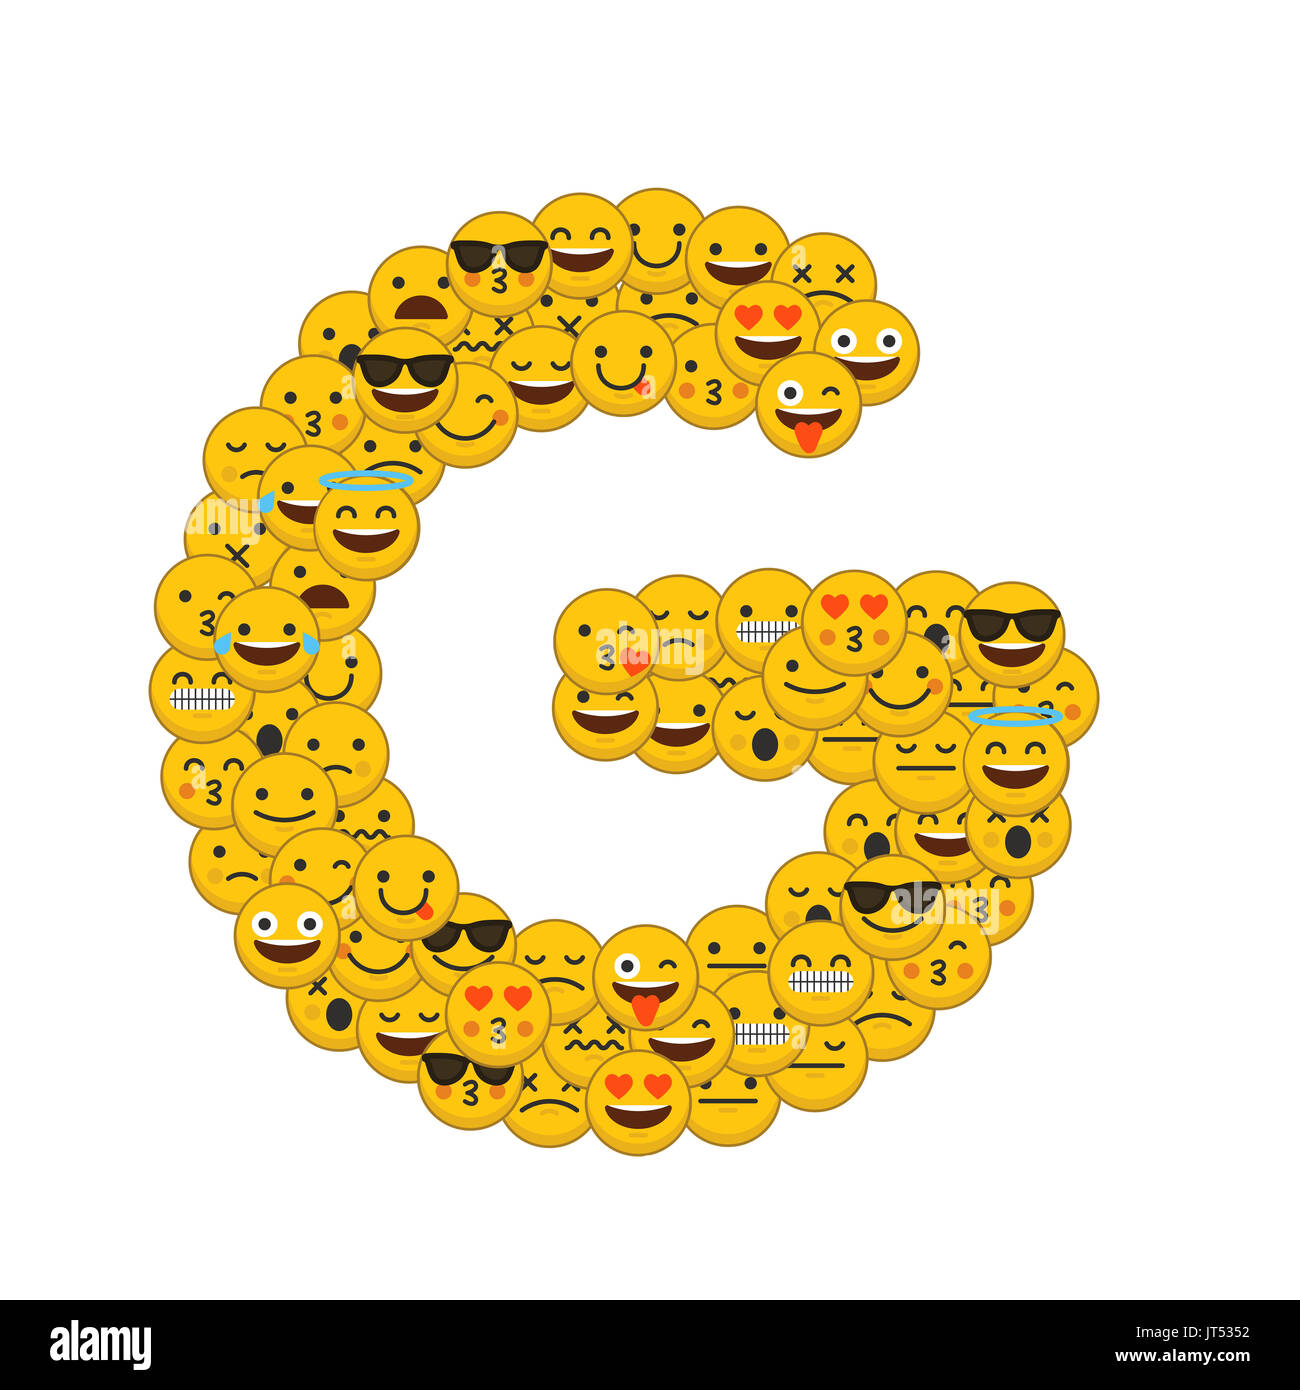 Emoji smiley characters capital letter G Stock Photo